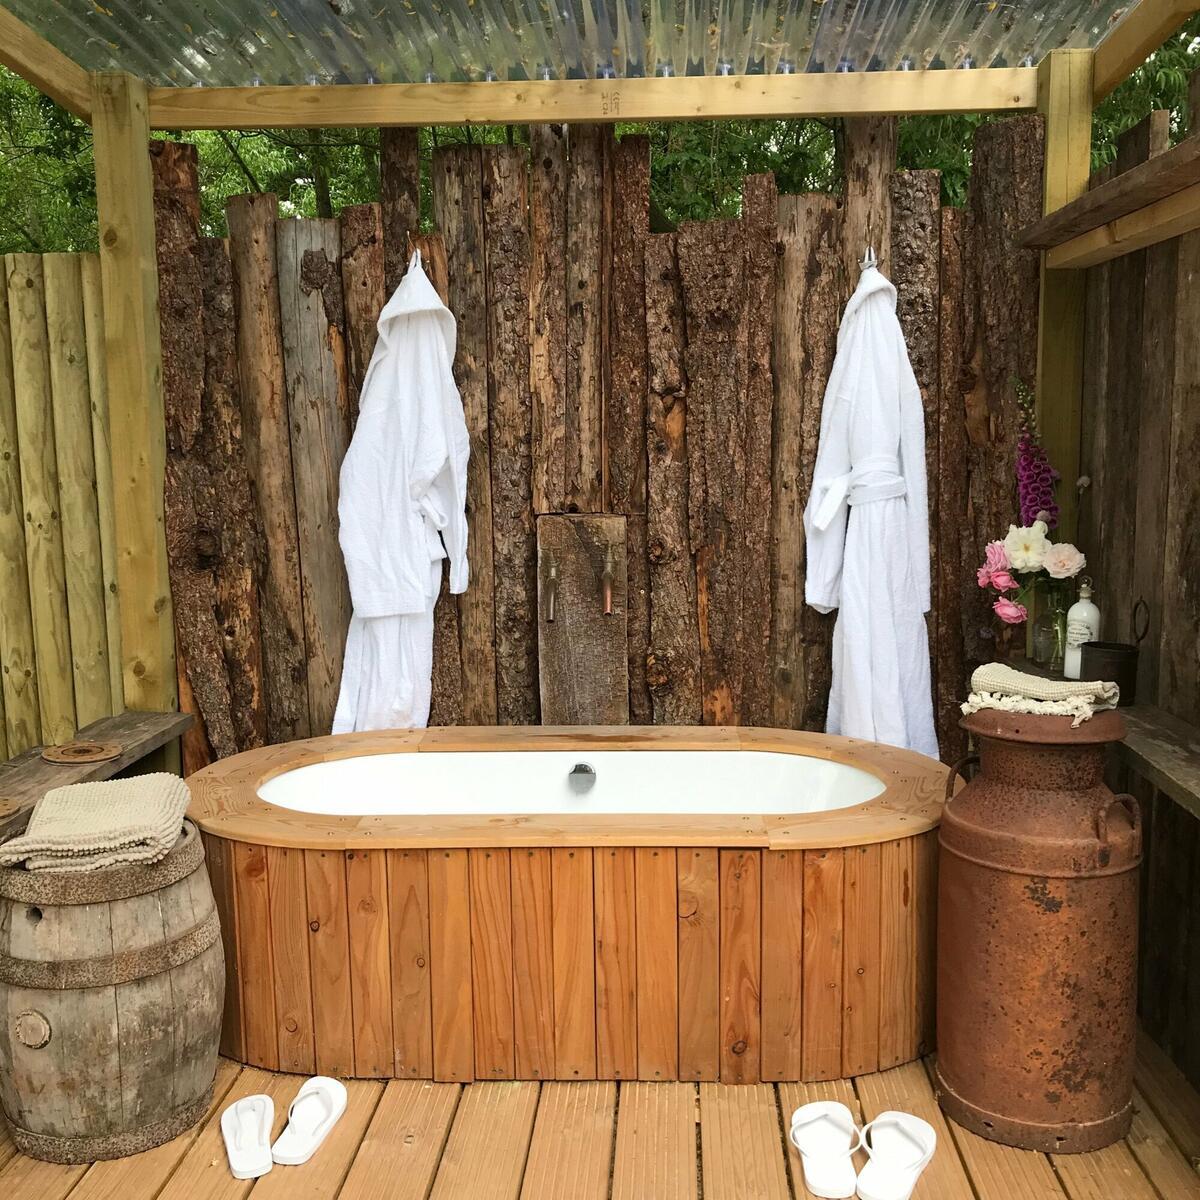 The Cider Shack's Outdoor Bath